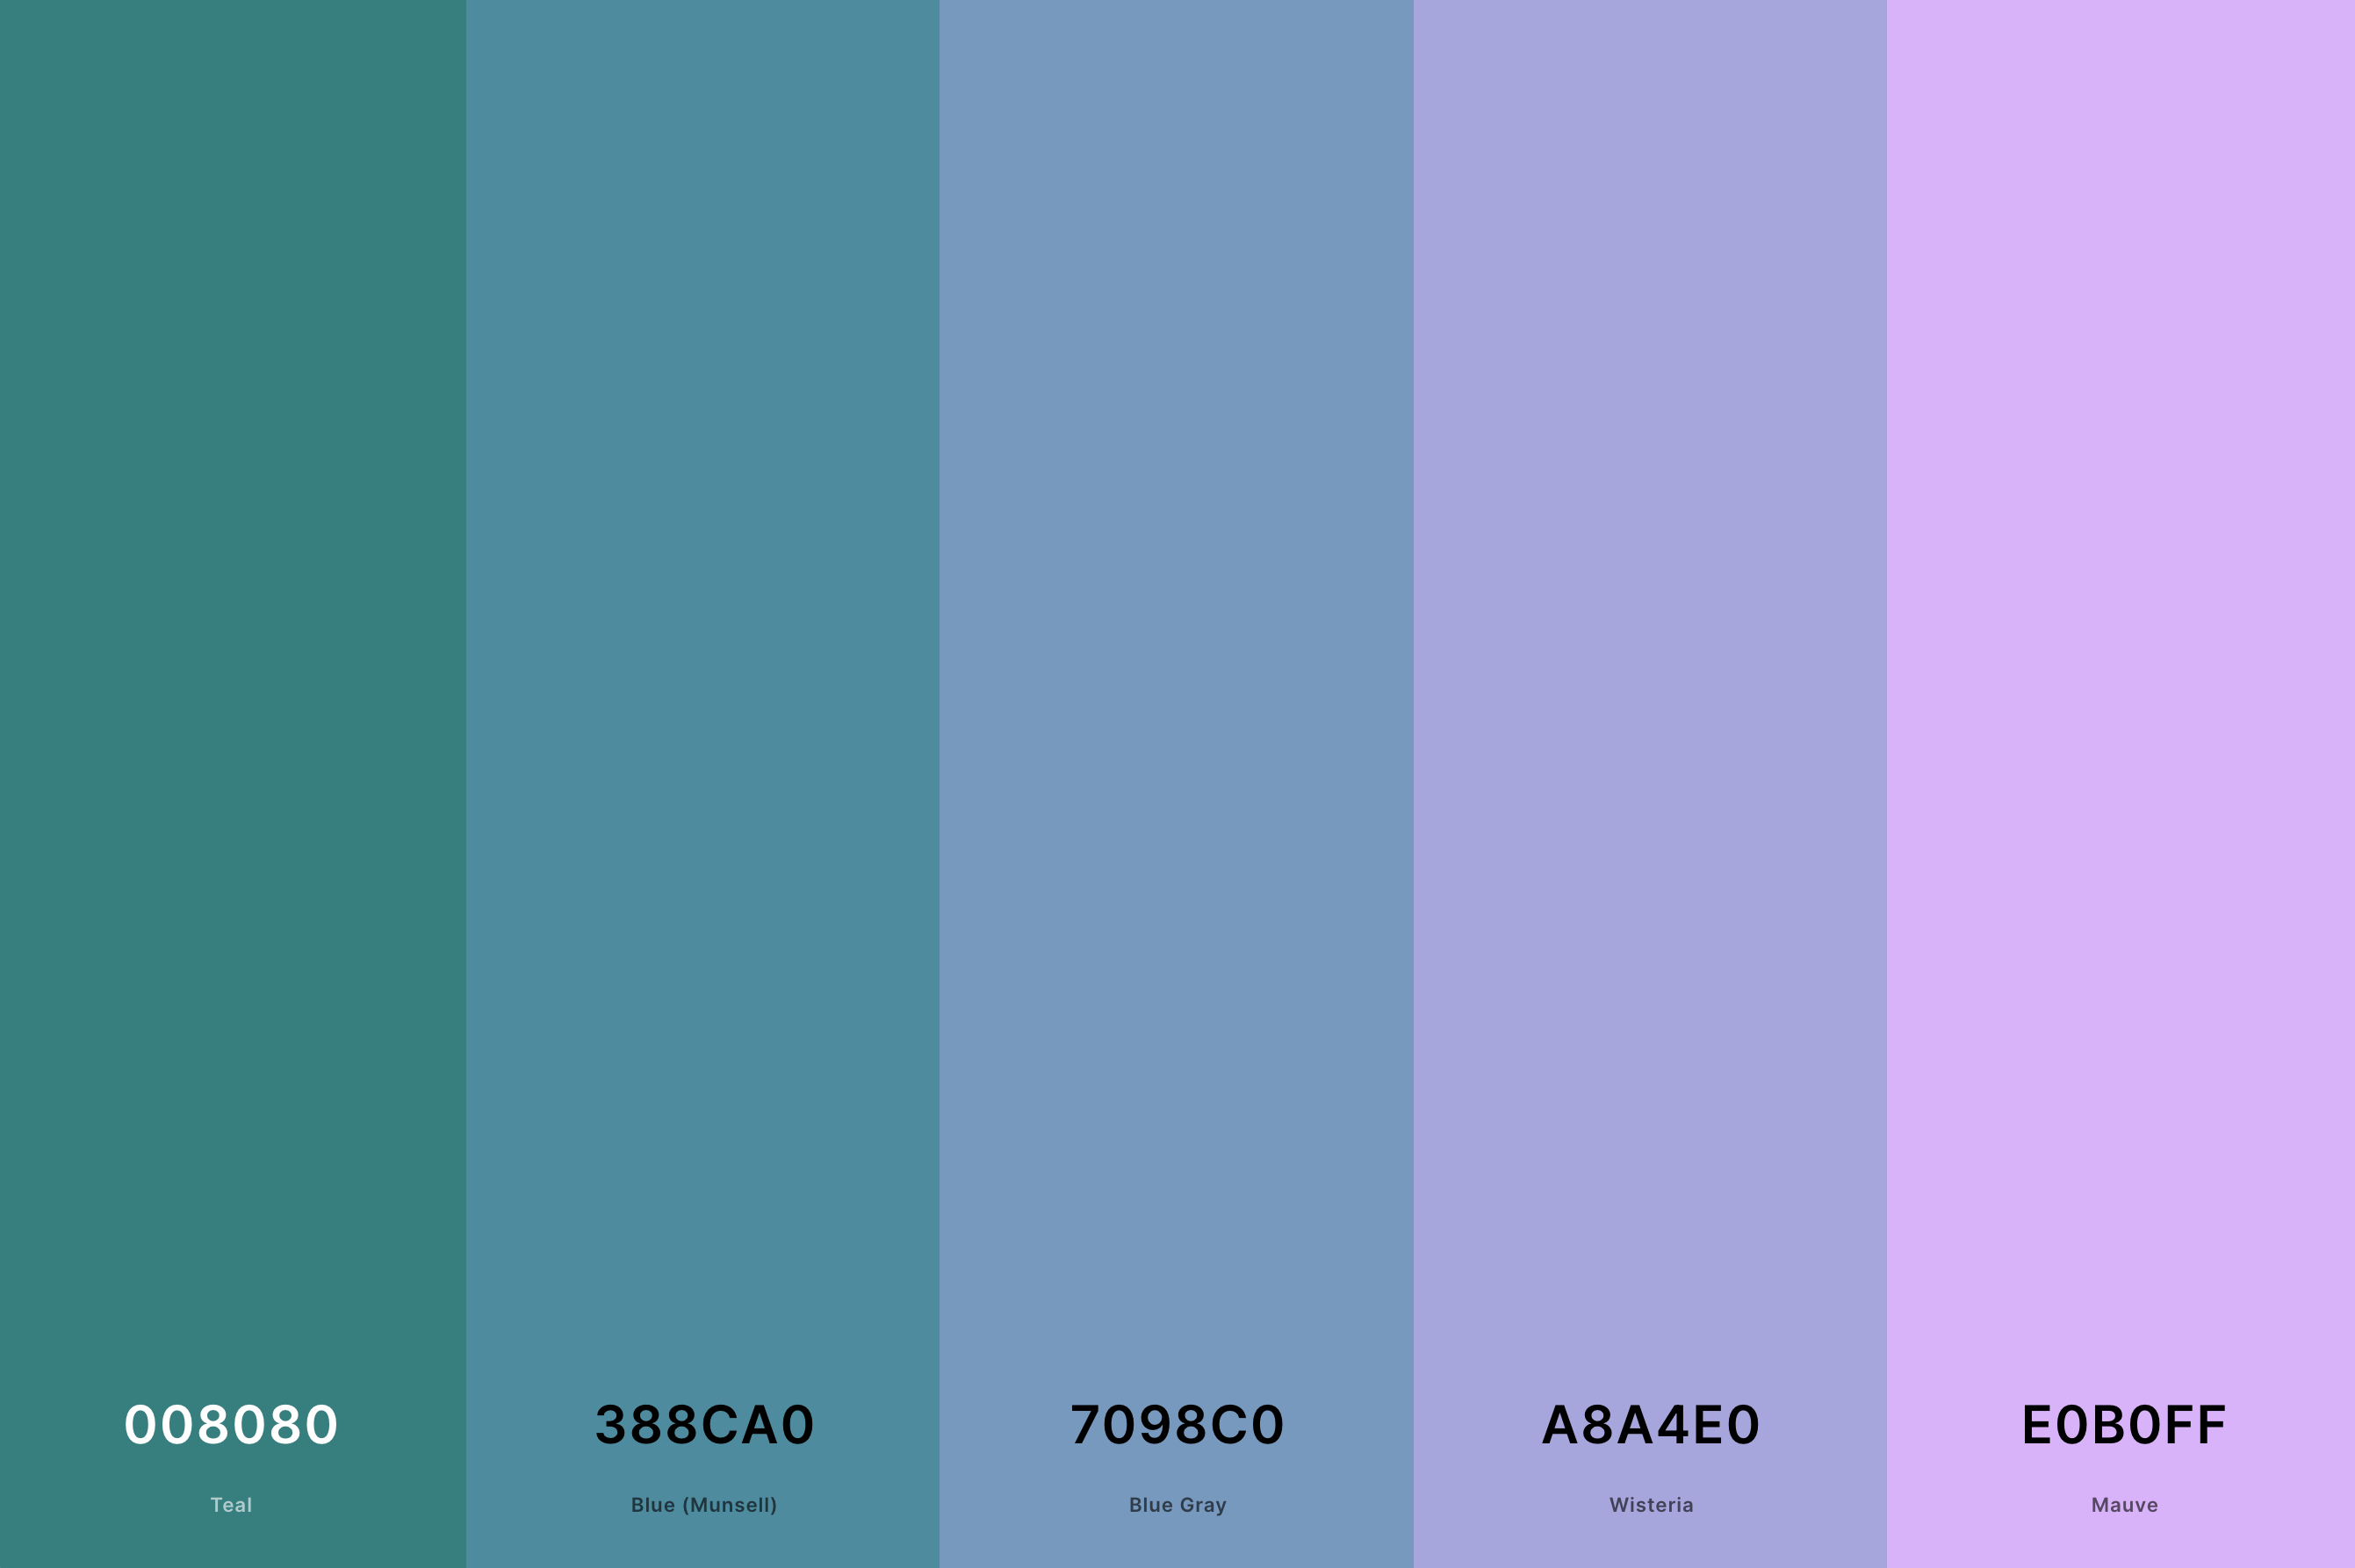 21. Mauve And Teal Color Palette Color Palette with Teal (Hex #008080) + Blue (Munsell) (Hex #388CA0) + Blue Gray (Hex #7098C0) + Wisteria (Hex #A8A4E0) + Mauve (Hex #E0B0FF) Color Palette with Hex Codes